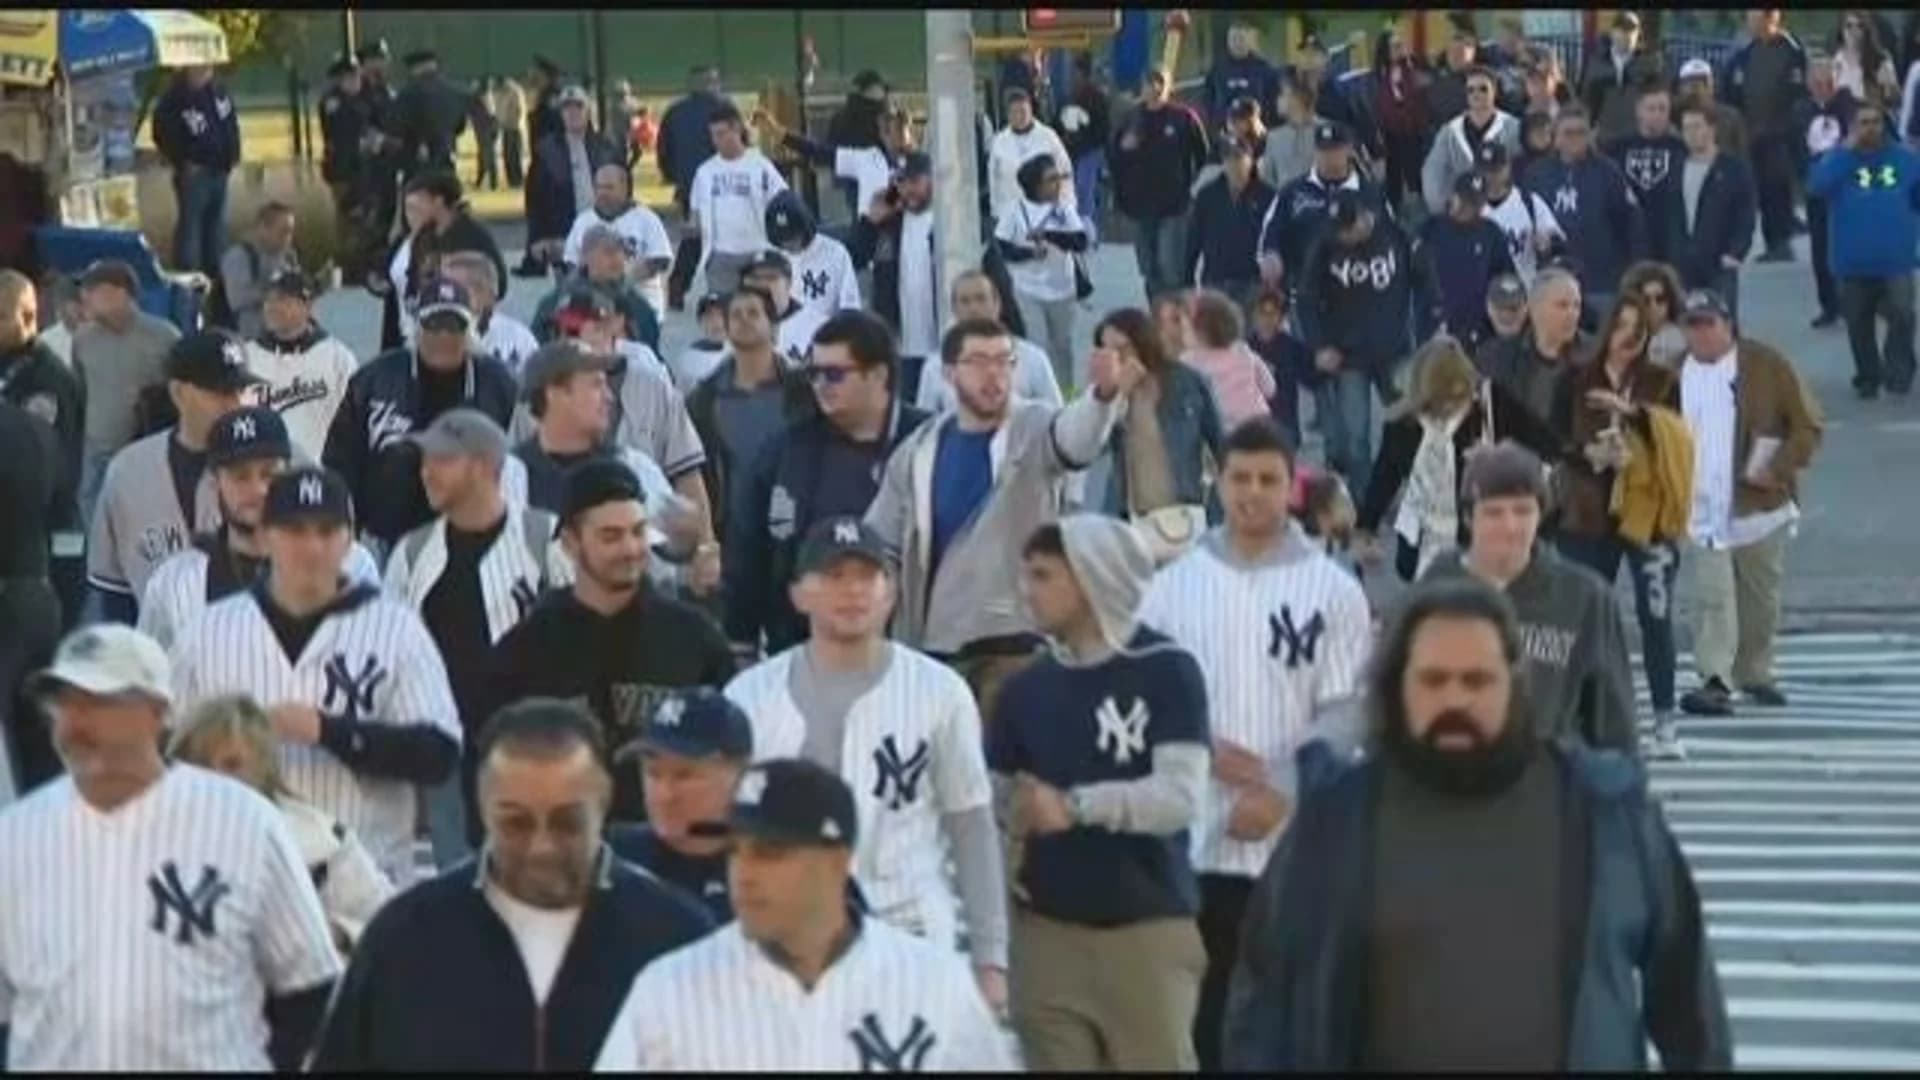 Yankee fans hope team will end 10-year World Series drought